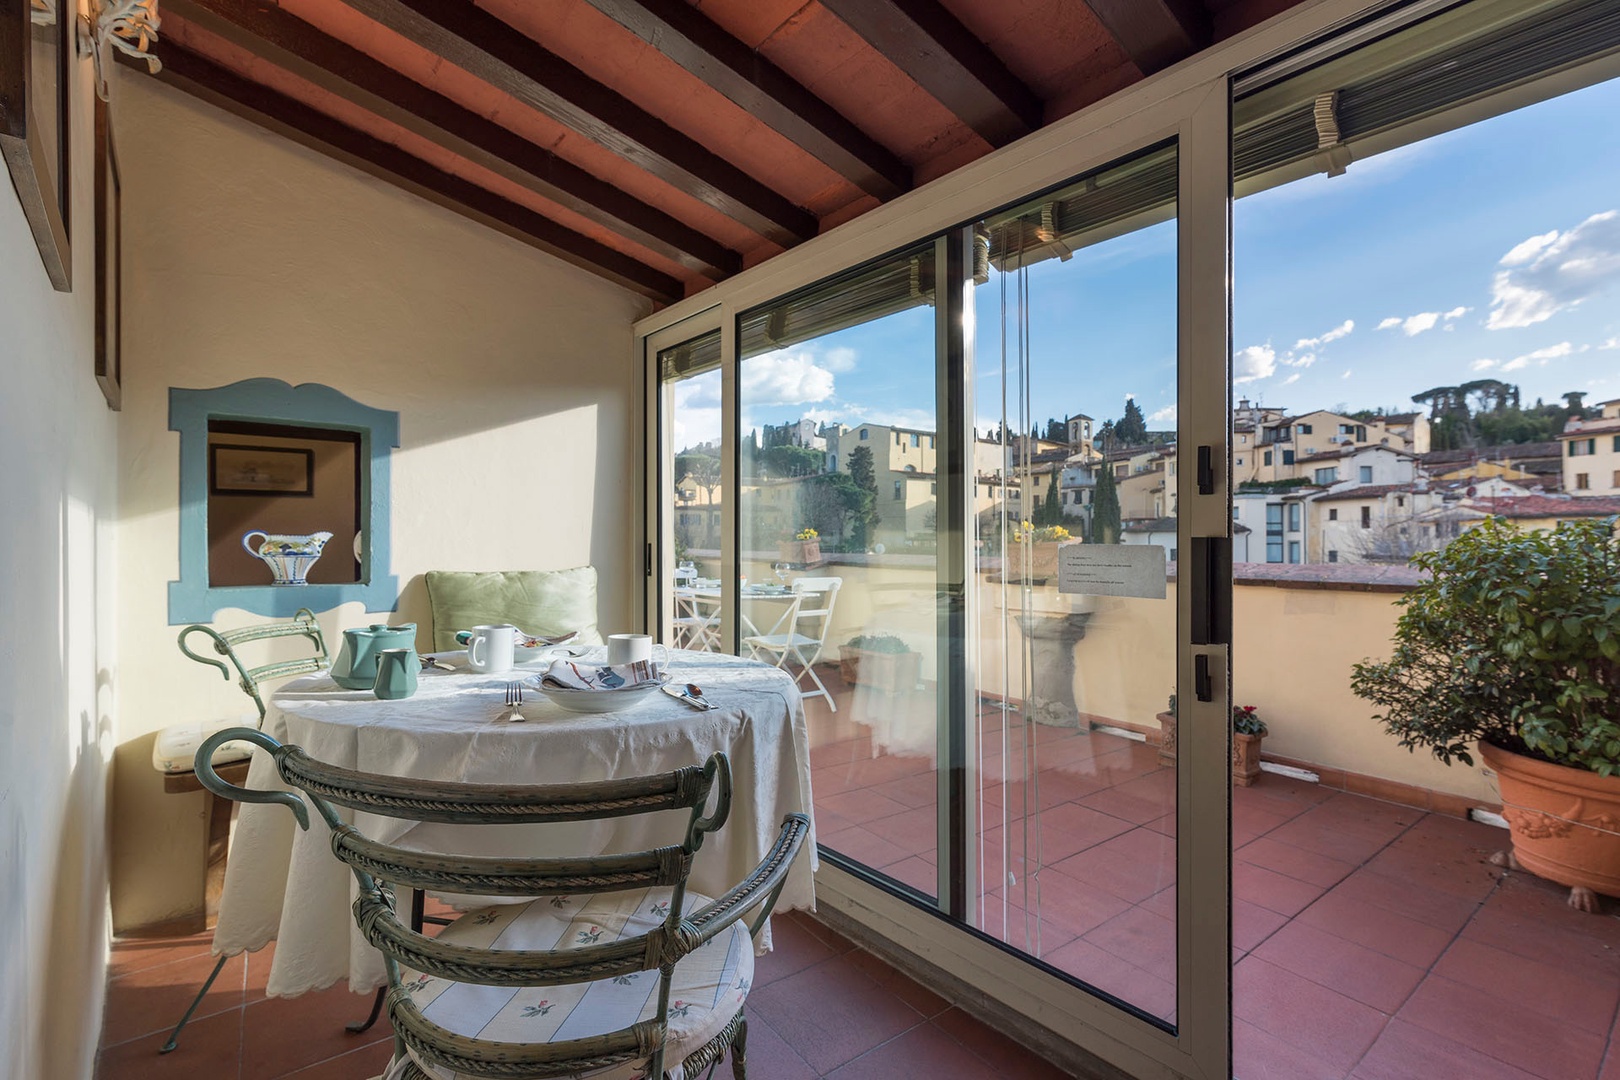 Glass enclosed sun room has a dining table with seating for 2 and views out the terrace.